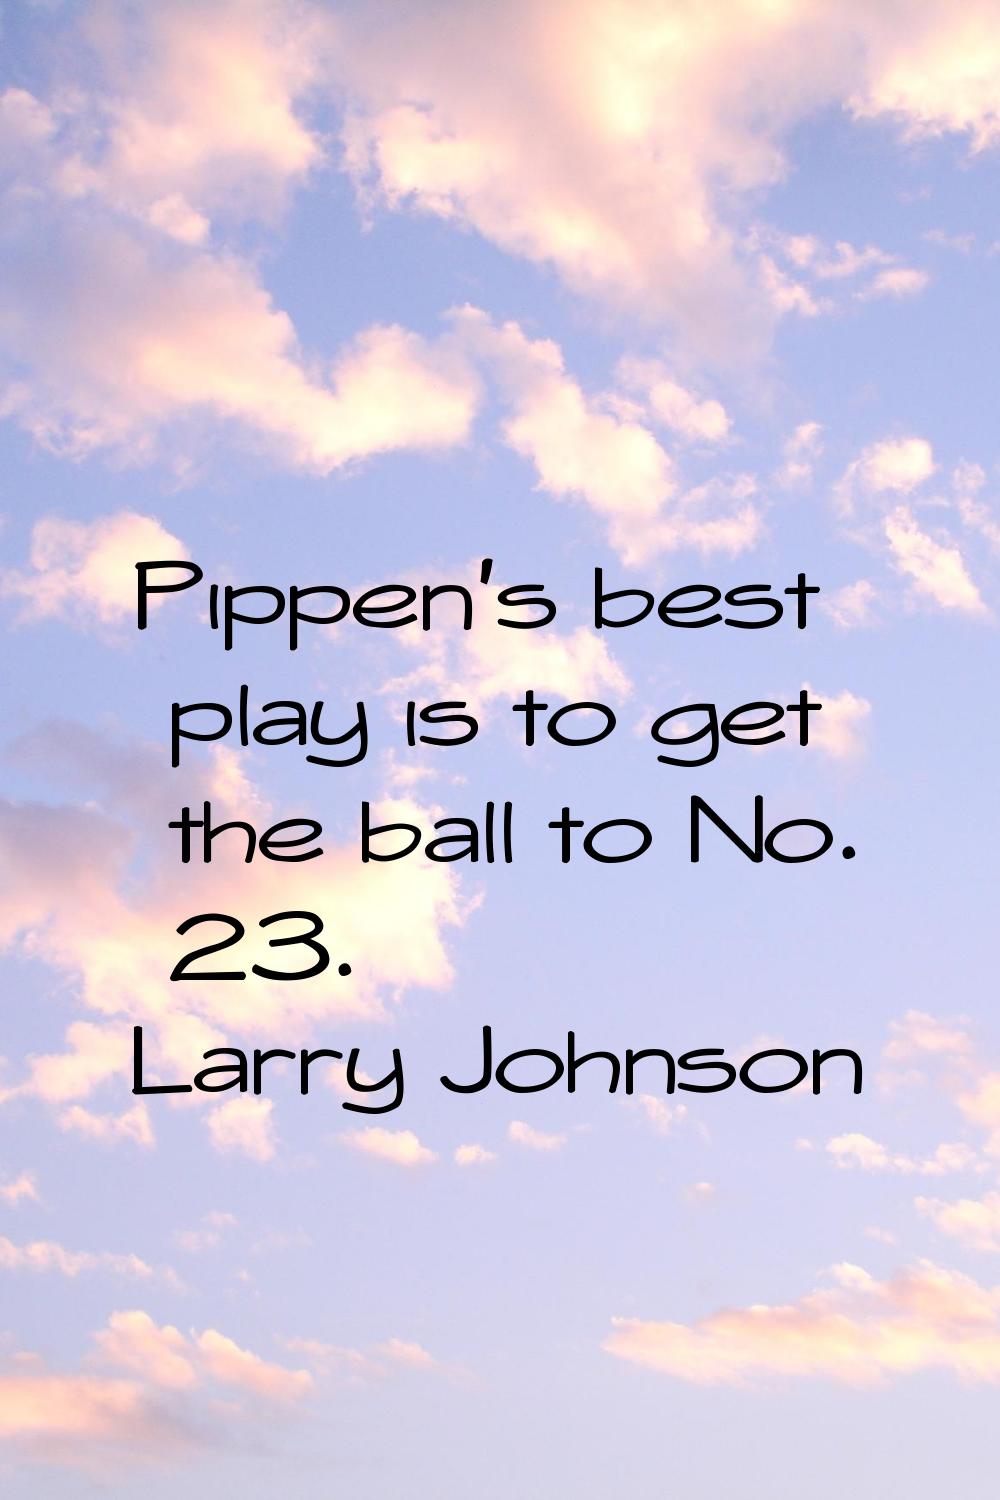 Pippen's best play is to get the ball to No. 23.